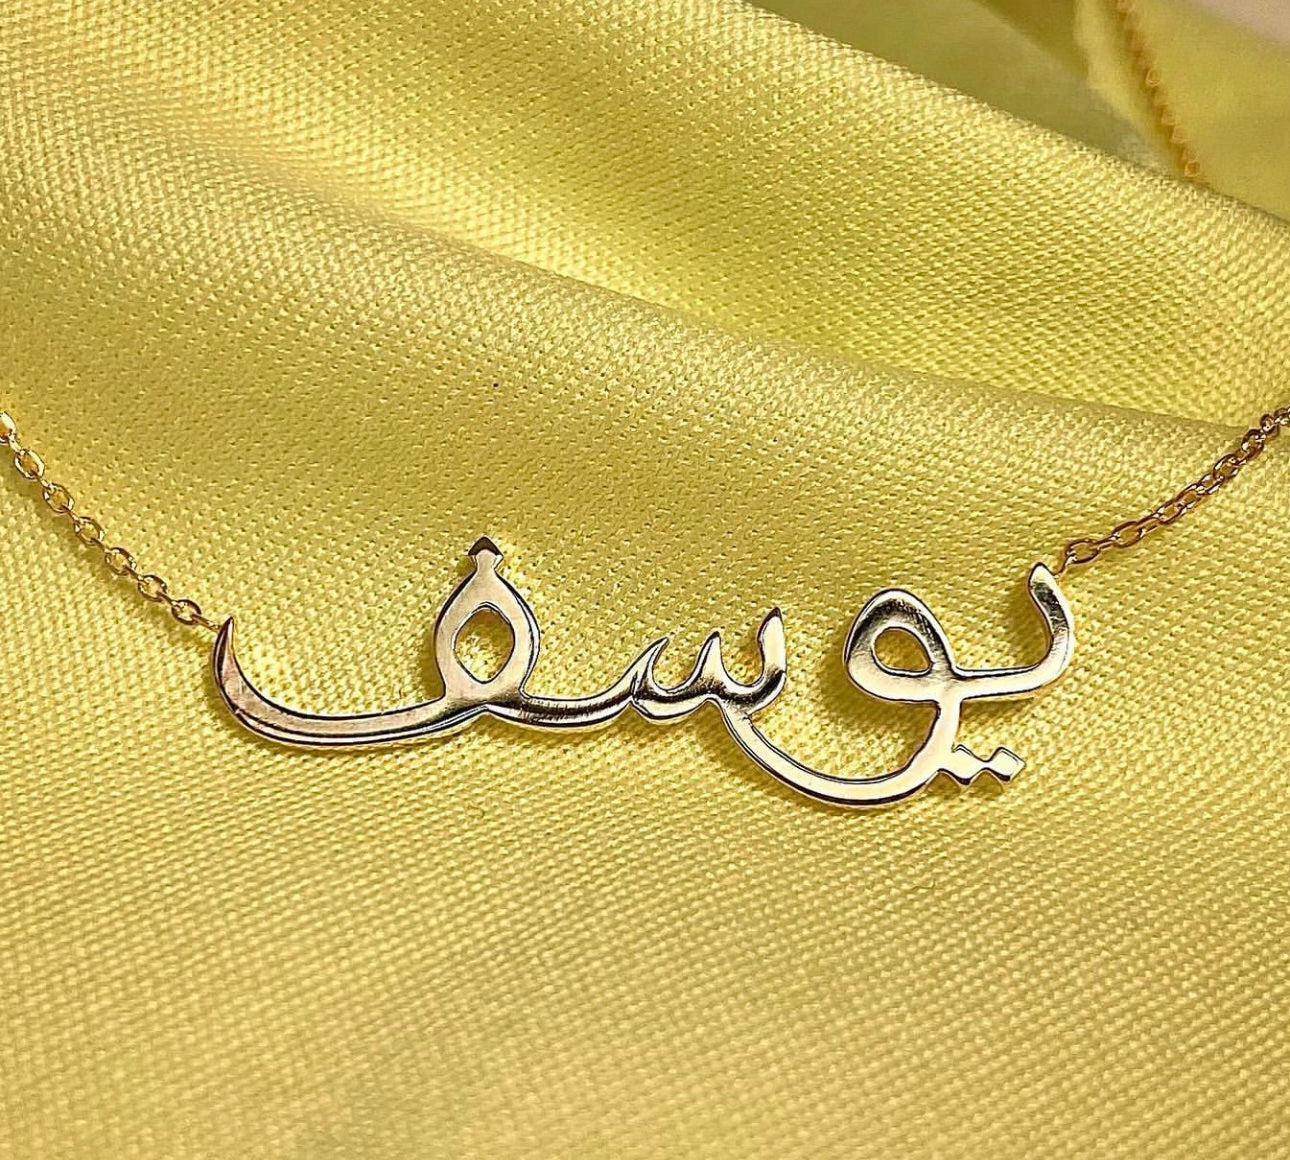 The Beauty and Significance of a Handwritten Solid 14 Karat Gold Arabic Name Necklace